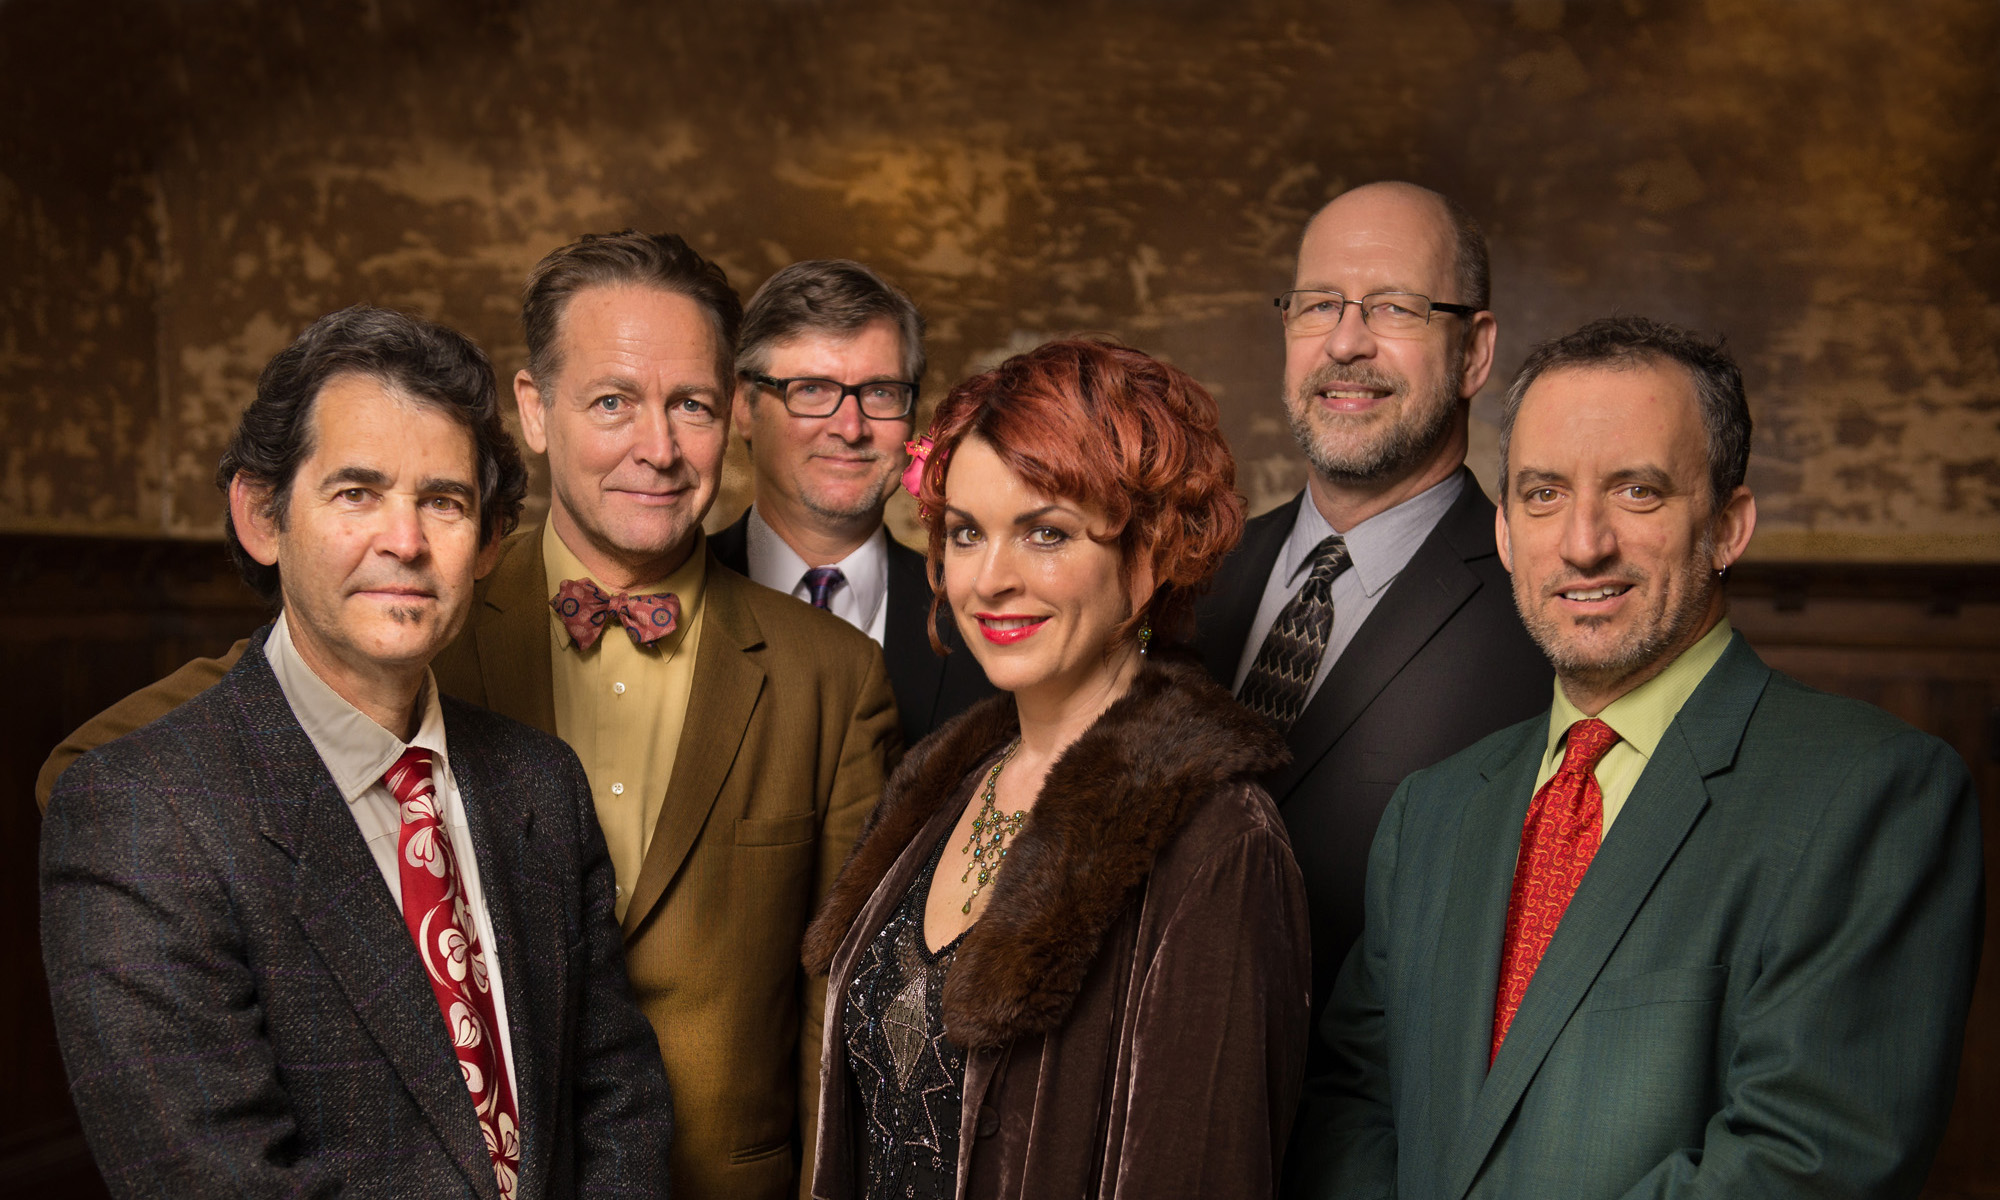 The highenergy retroswing sextet The Midnight Serenaders.